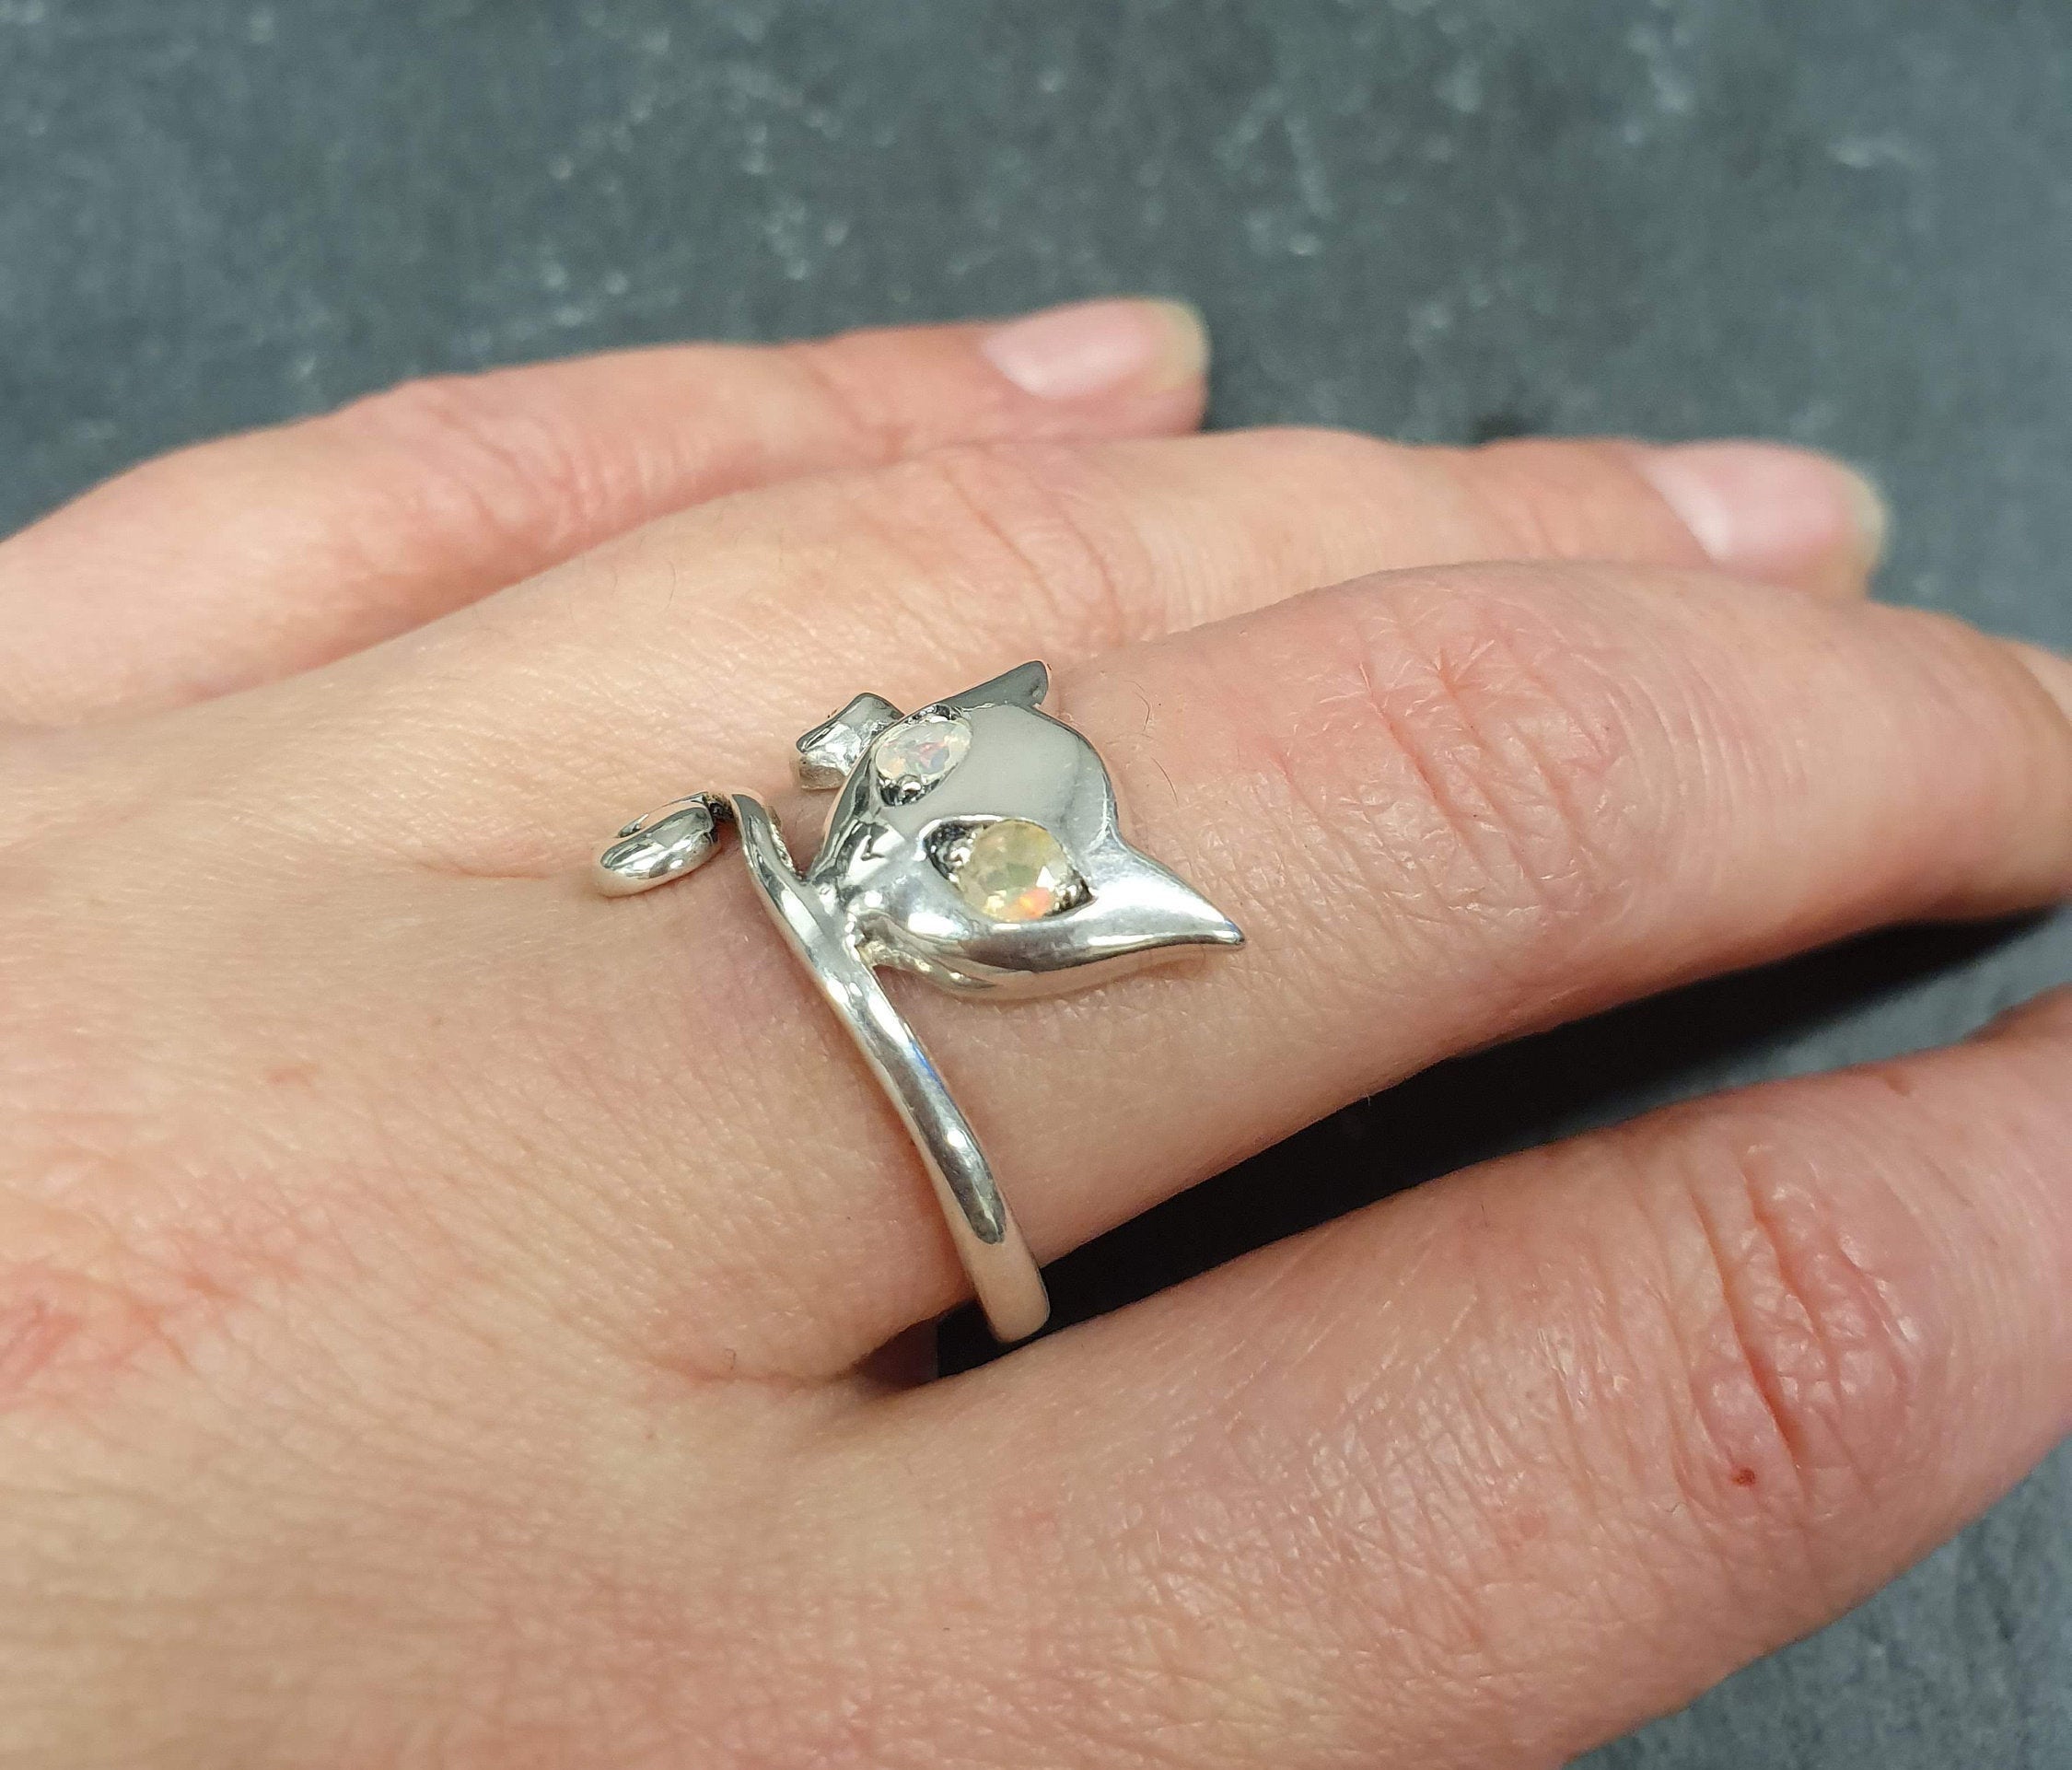 Fire Opal Ring, Opal Ring, Natural Opal Ring, October Birthstone, Silver Cat Ring, Vintage Ring, Cats Eye Ring, Cat Ring, Solid Silver Ring